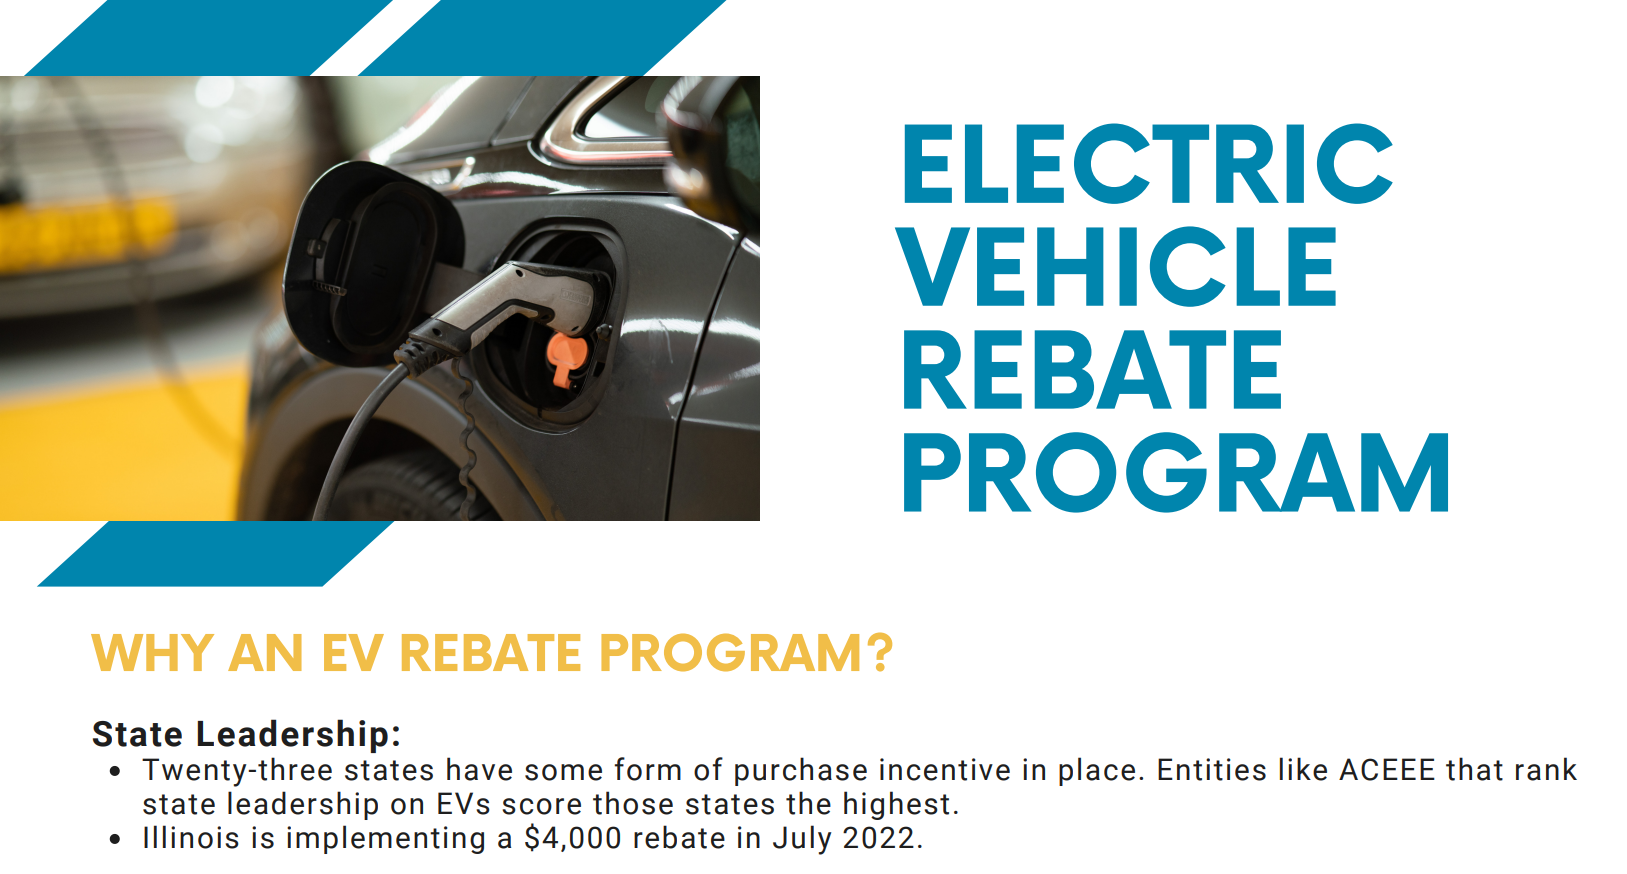 Clean Fuel Rebate For Fueling Electric Vehicles